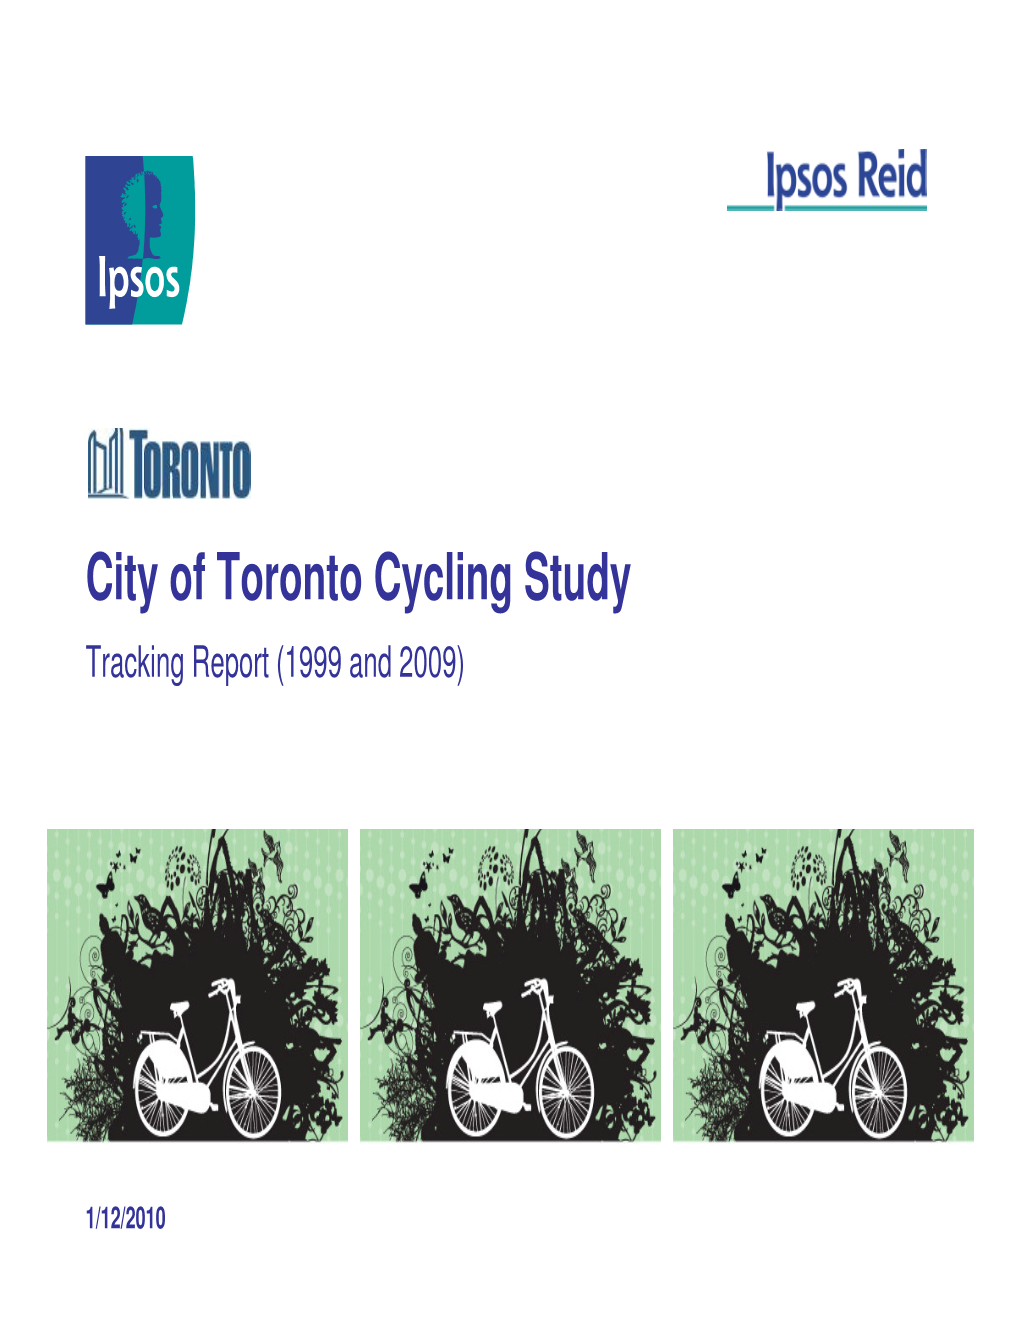 City of Toronto Cycling Study Tracking Report (1999 and 2009)